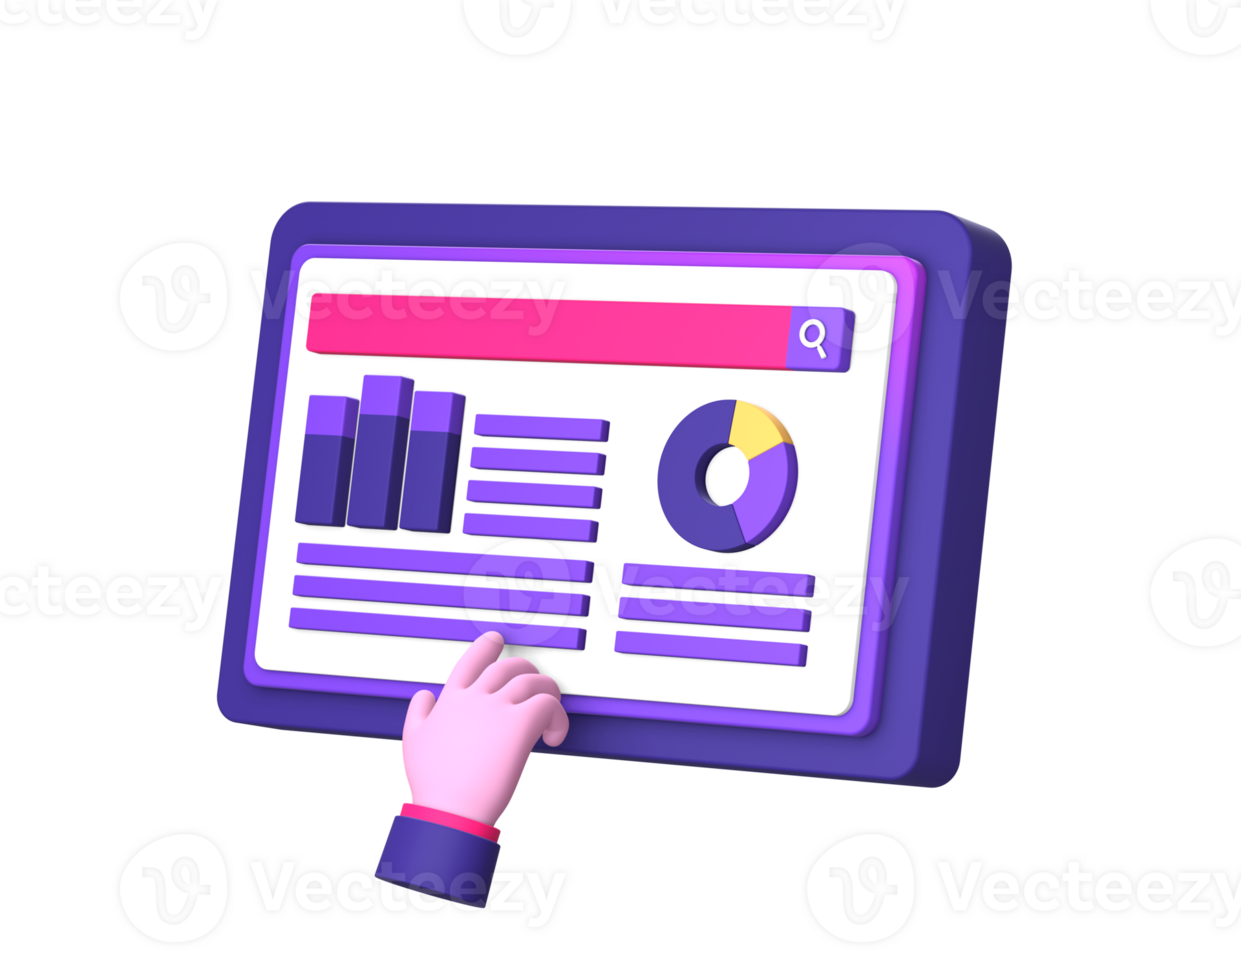 3d purple illustration icon of using tablet phone for business job with hand gesture side for UI UX social media ads design png